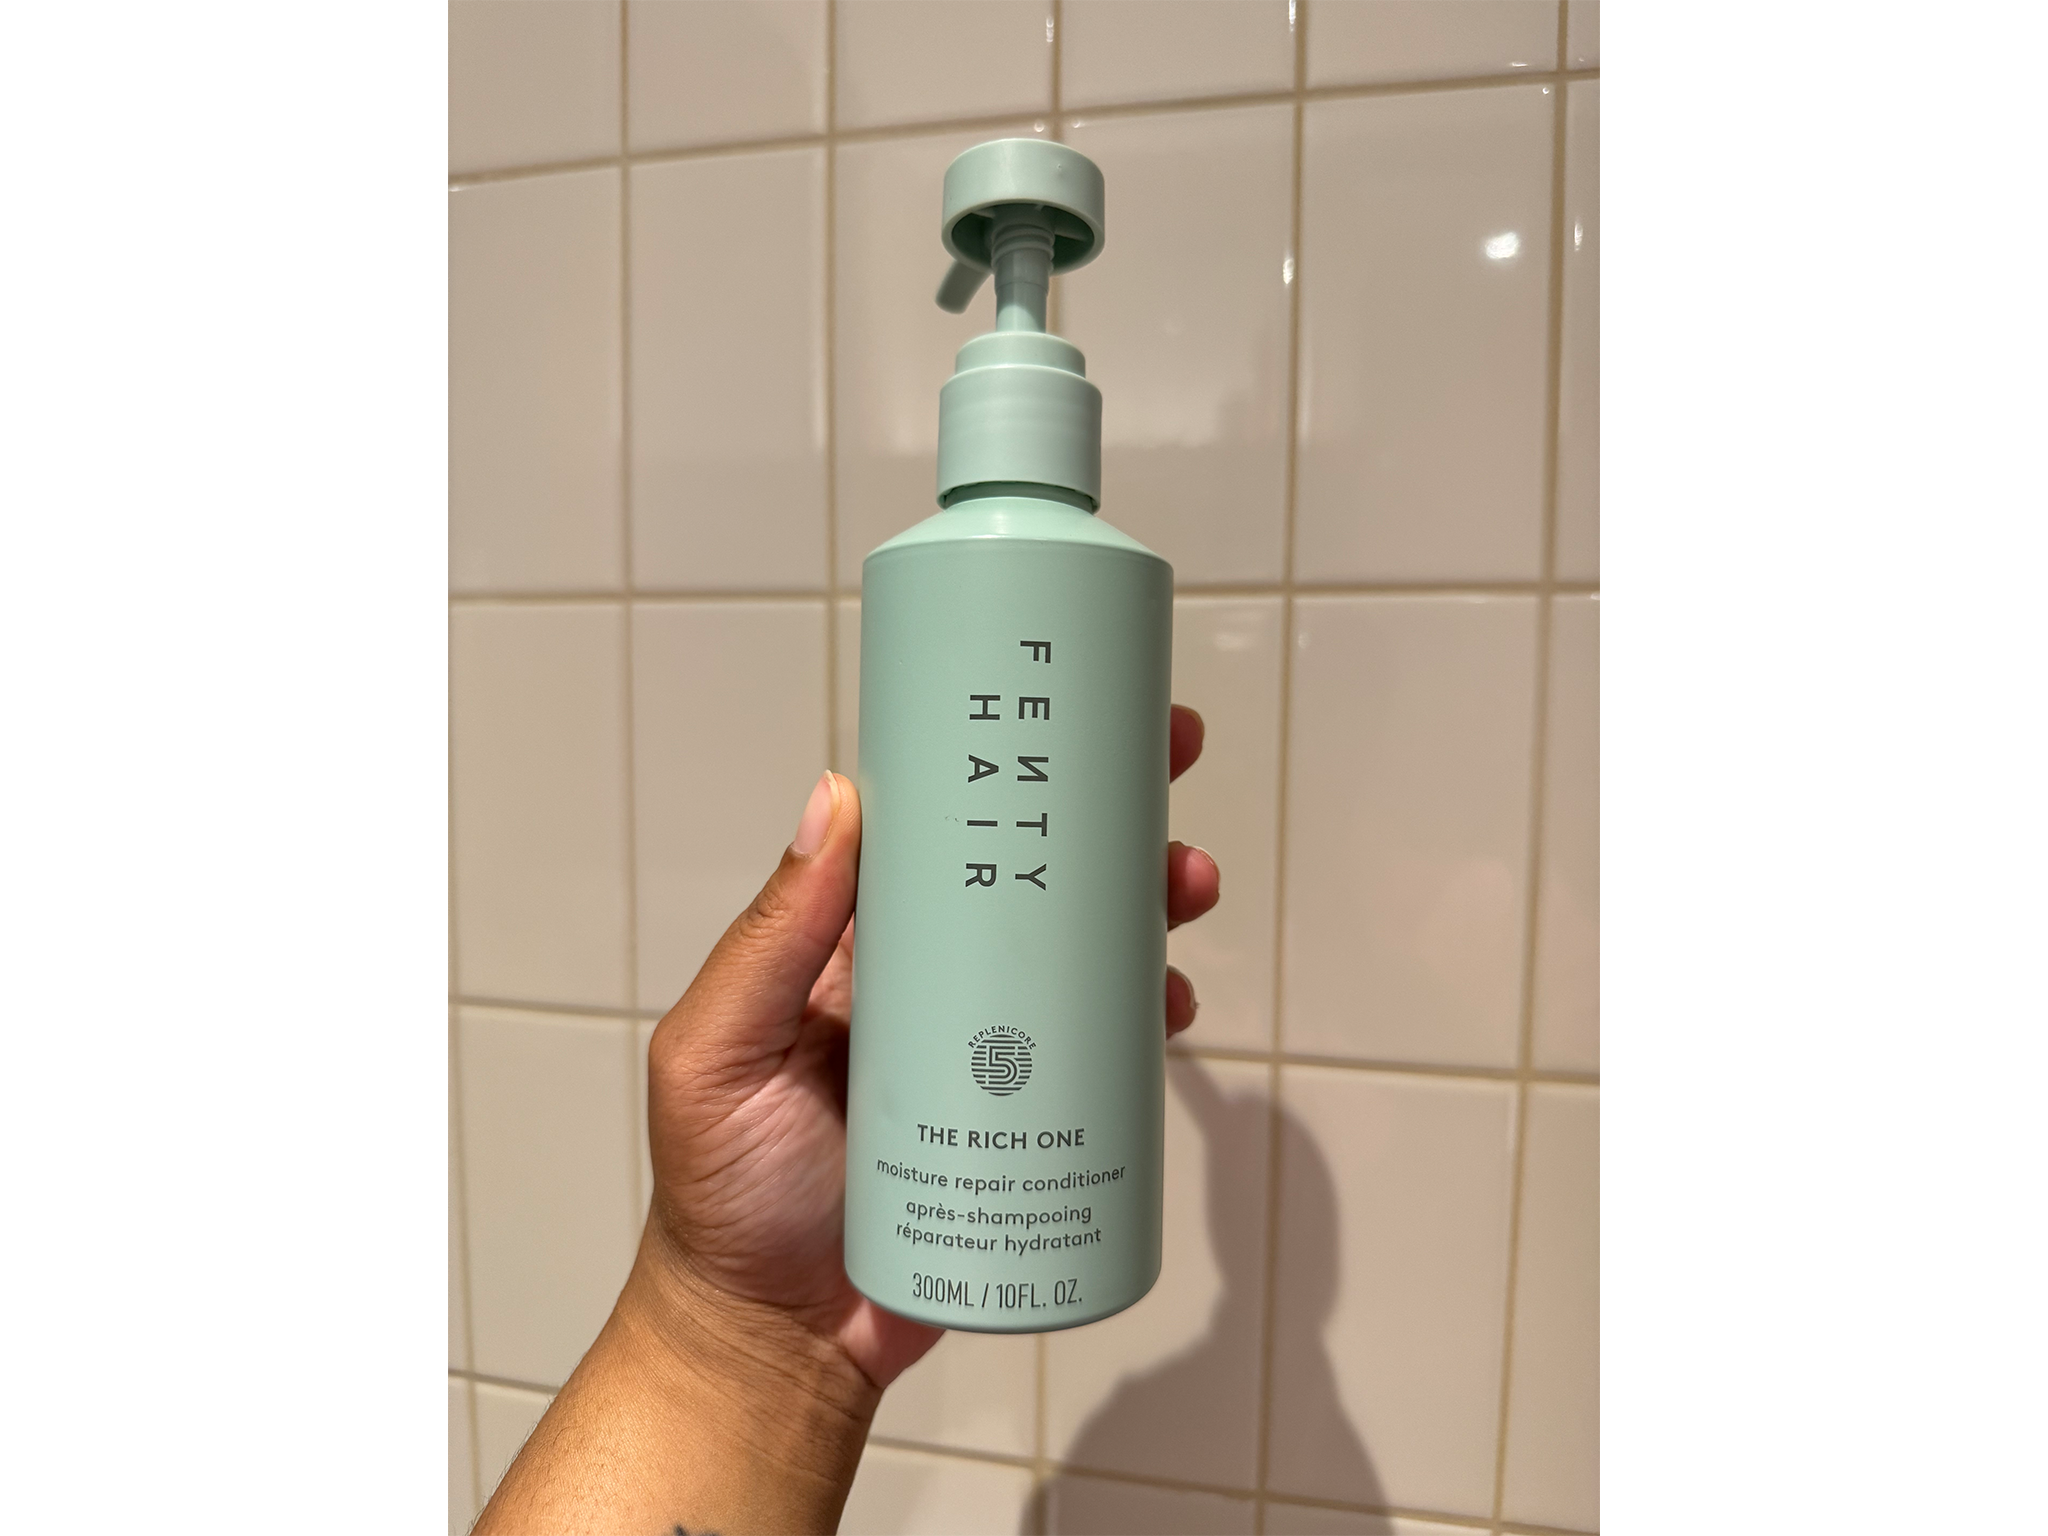 Fenty Hair IndyBest review Fenty Hair the rich one moisture repair conditioner